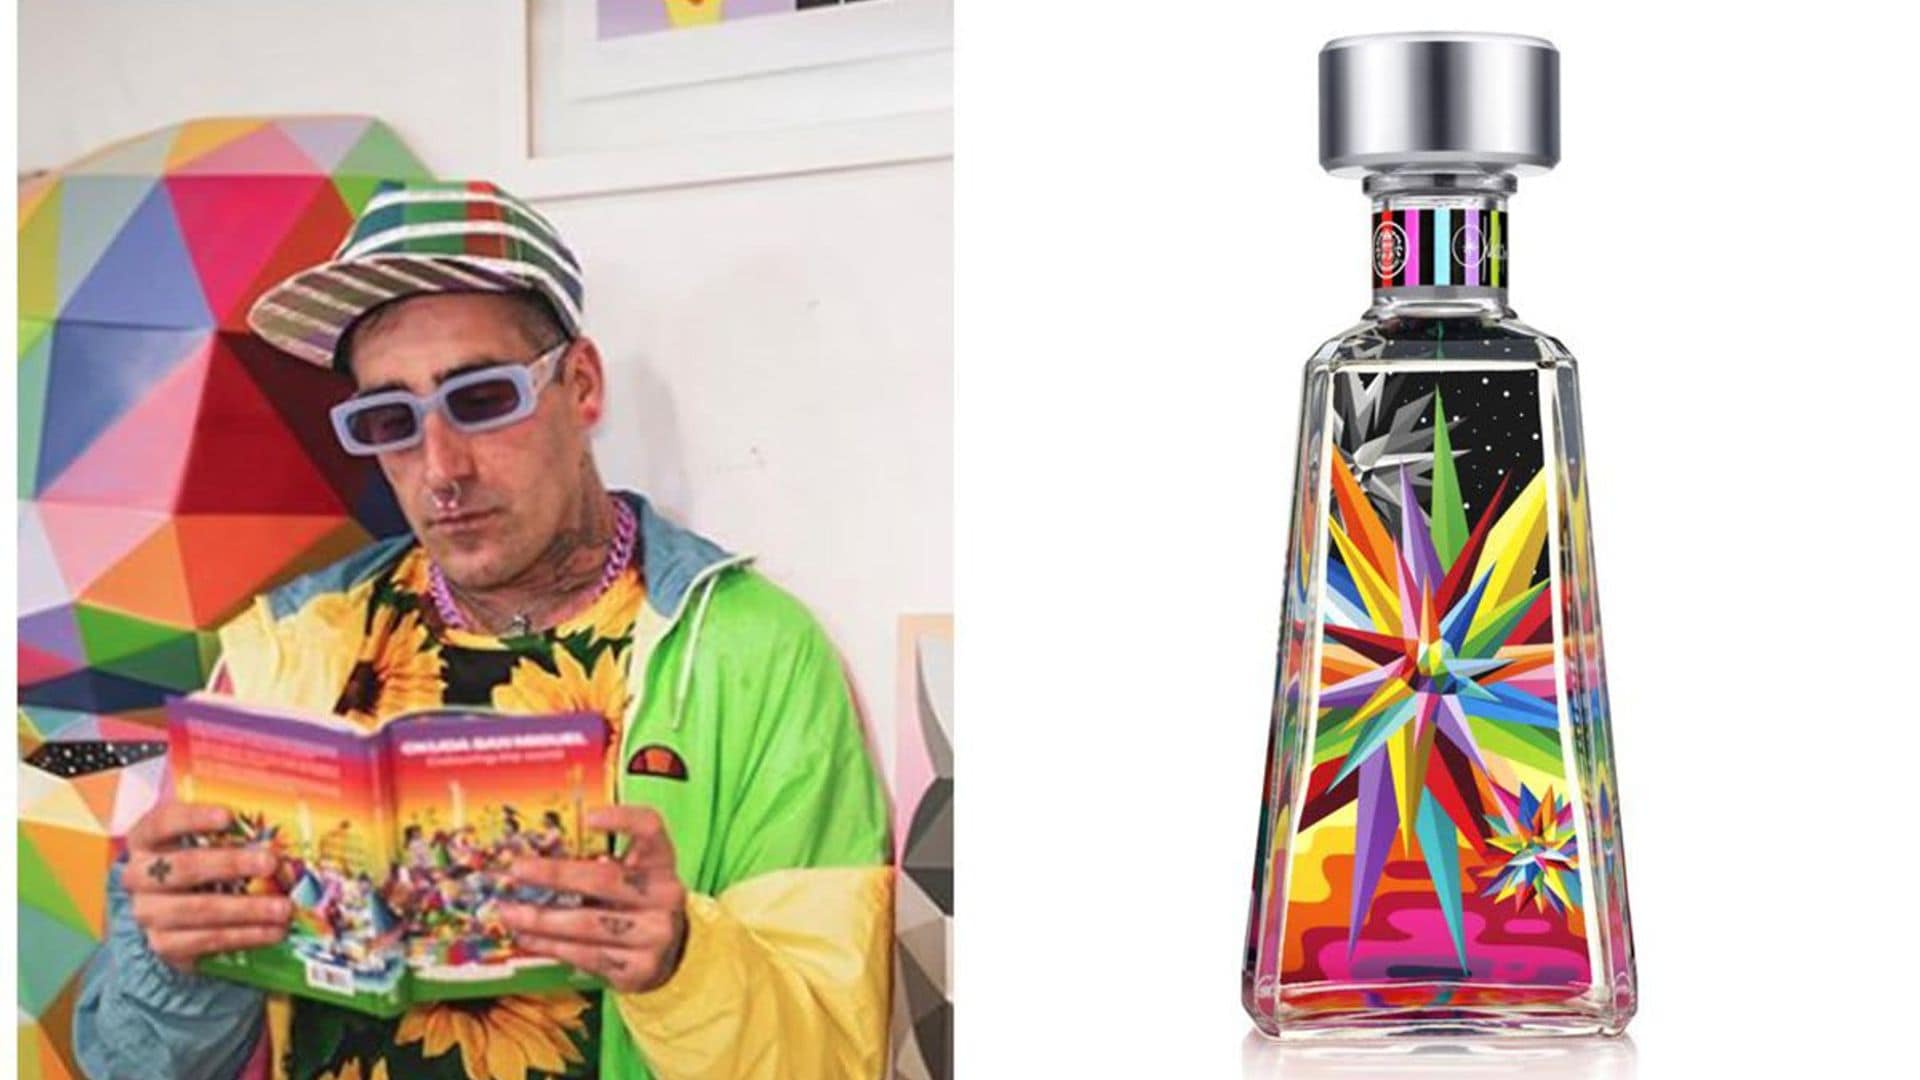 Spanish artist, Okuda San Miguel teamed up with 1800 Tequila to put his eccentric art onto special edition tequila bottles